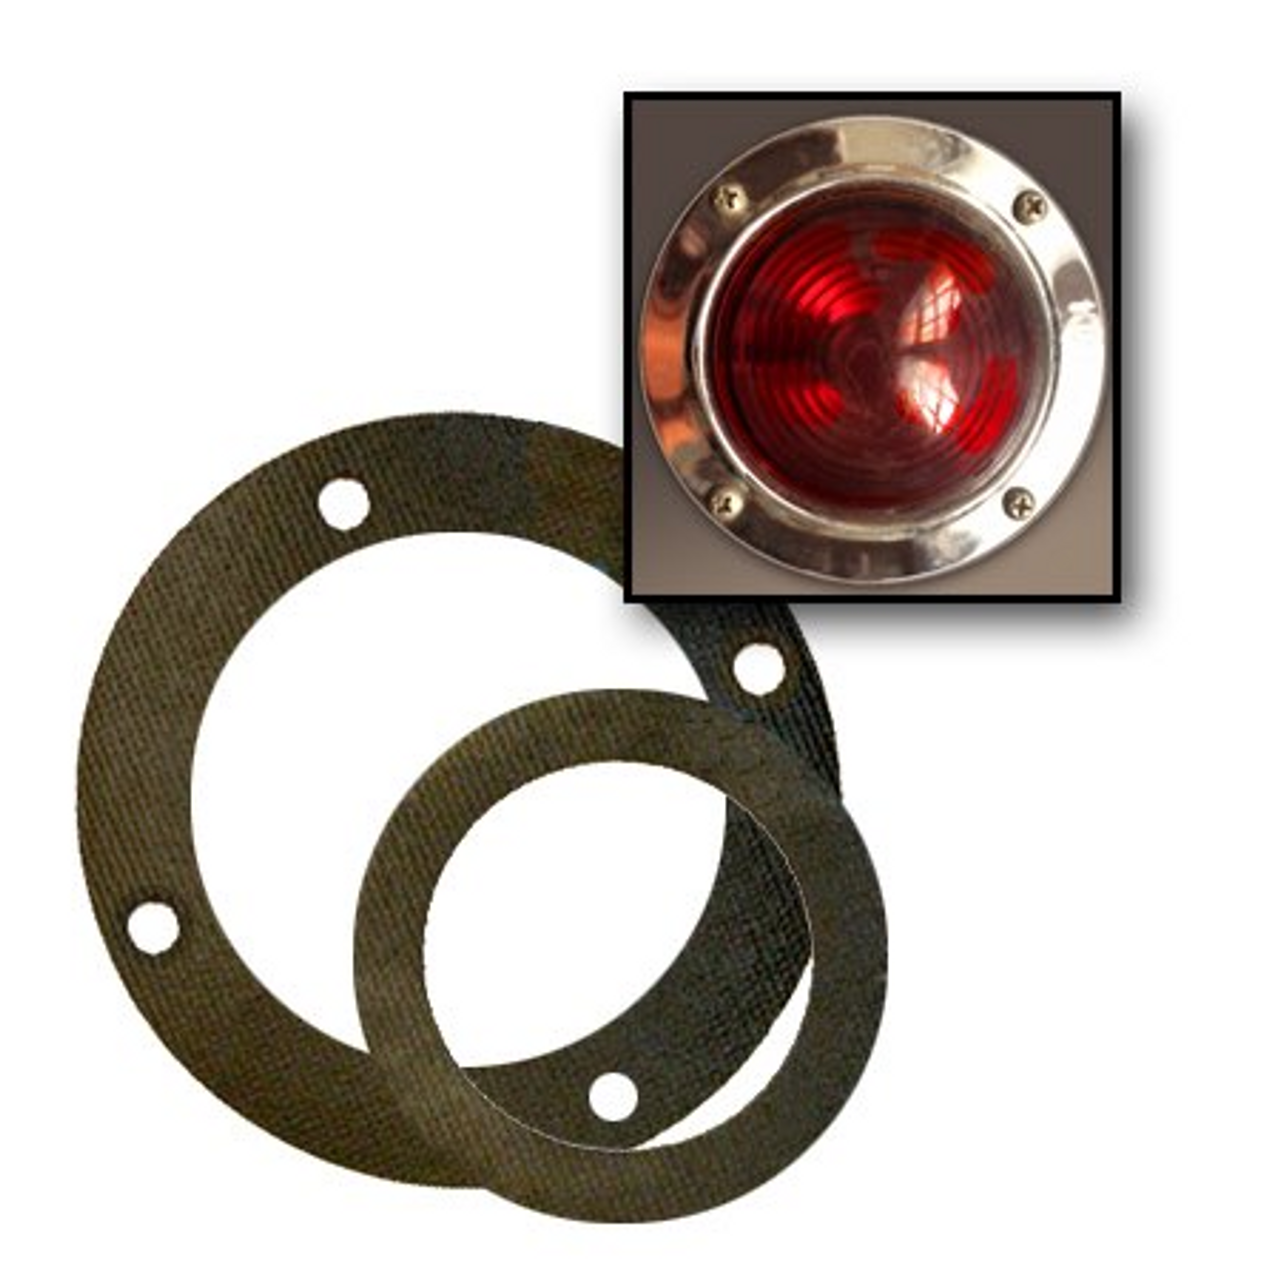 KD 520 Gasket (Set) (CLT103) LIGHT PICTURED IS NOT INCLUDED. SHOWN FOR DEMONSTRATION PURPOSES ONLY